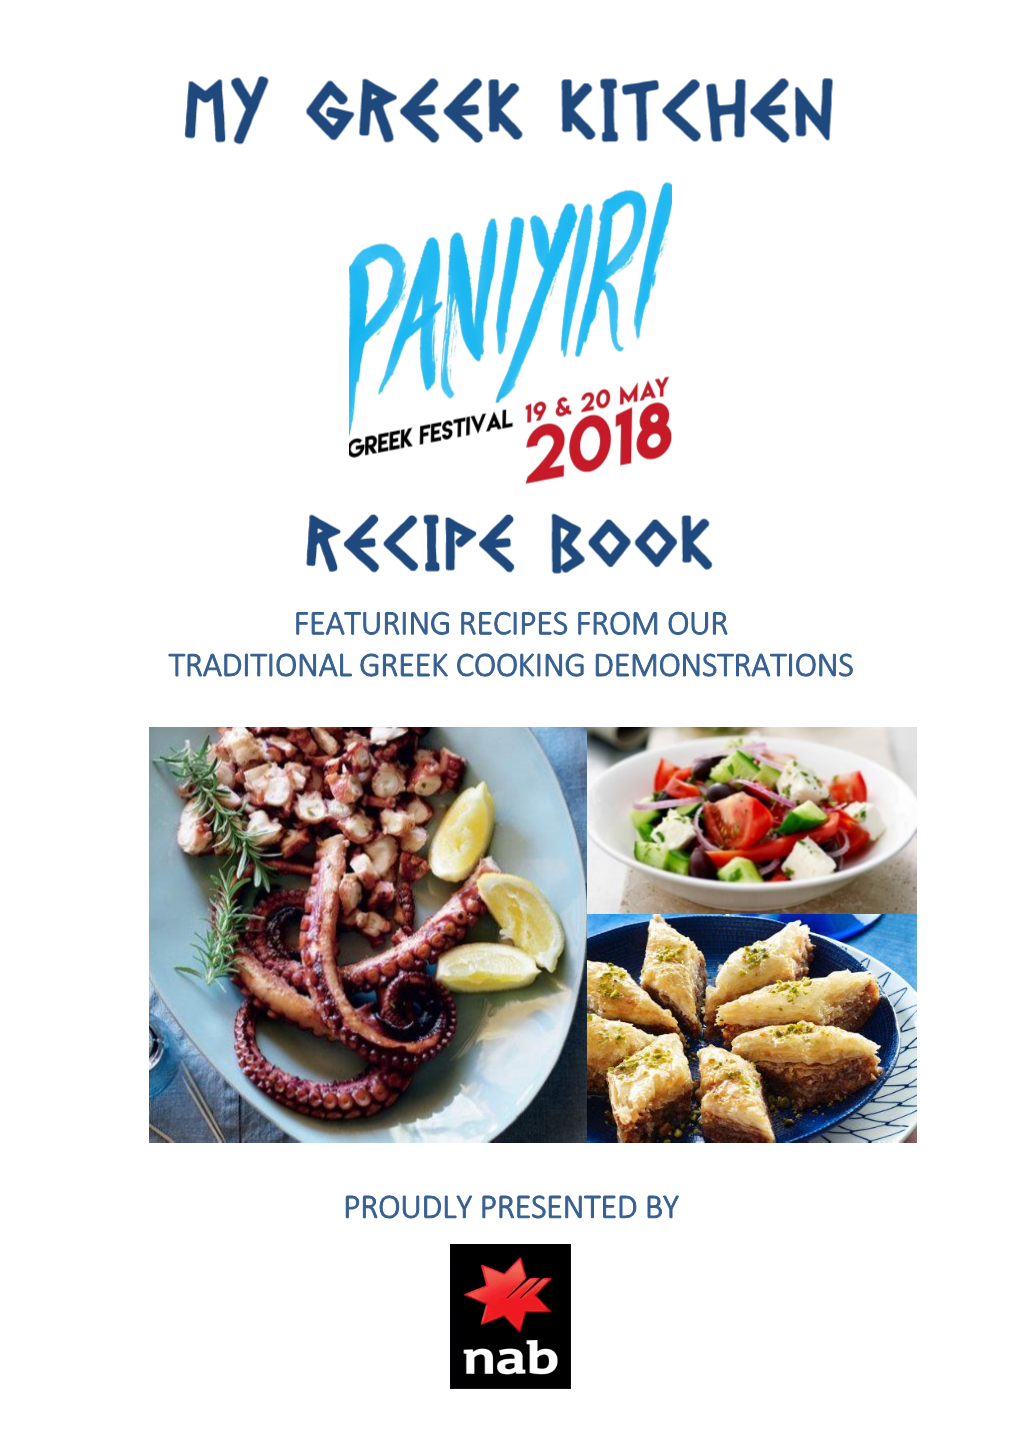 Featuring Recipes from Our Traditional Greek Cooking Demonstrations